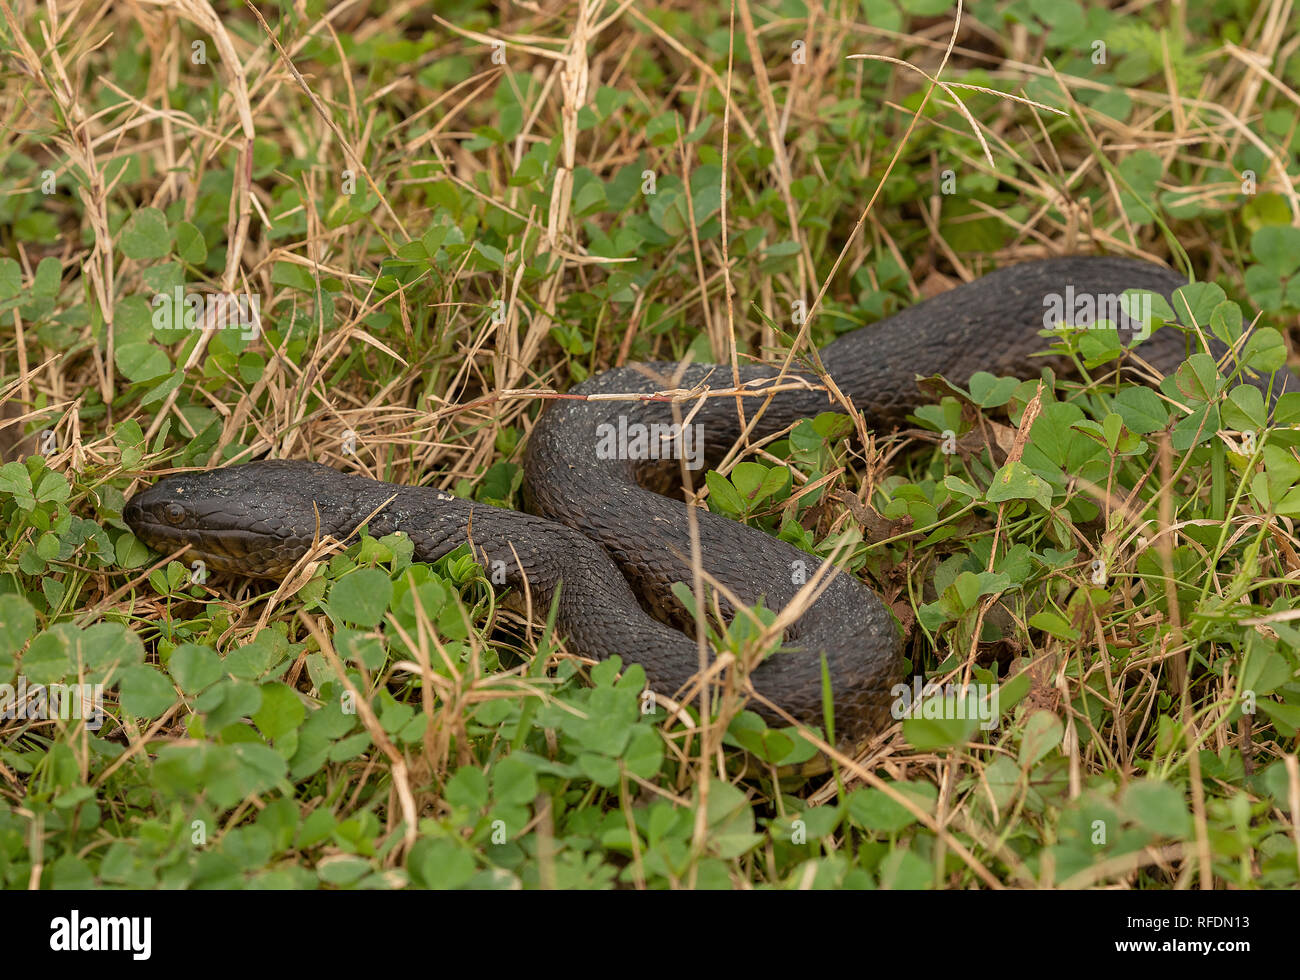 Mississippi Green Watersnake, Nerodia cyclopion, in Brazos Bend State Park, Texas. Stock Photo